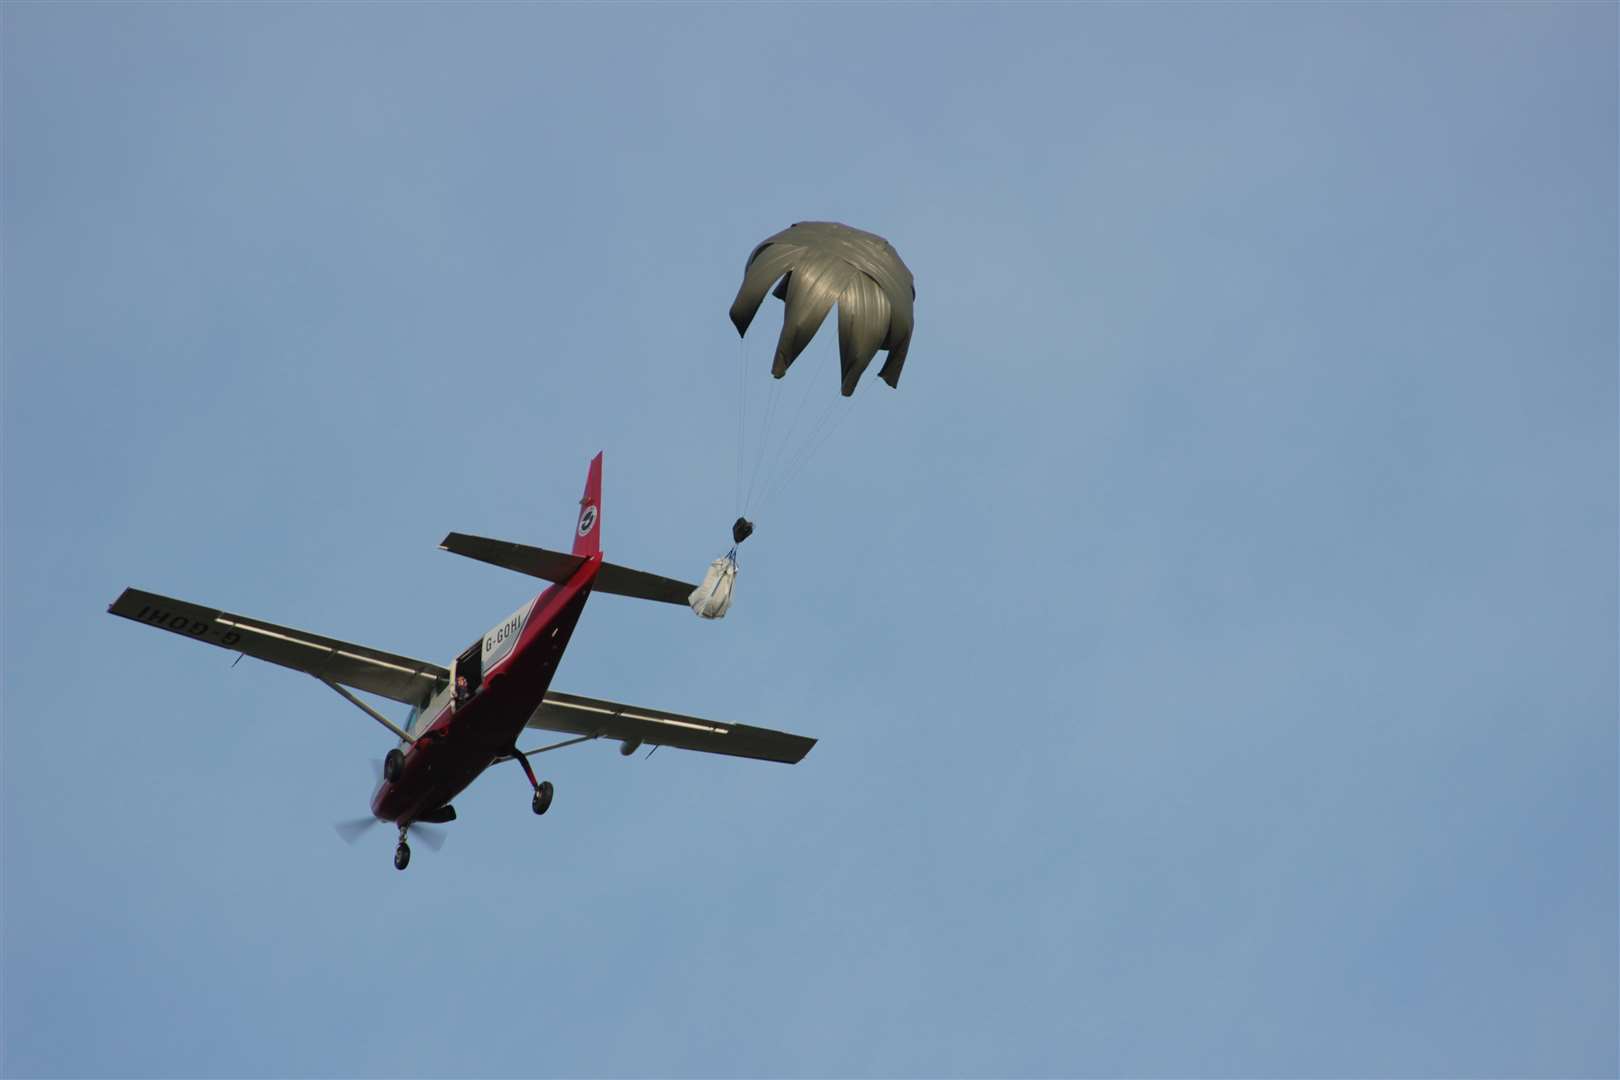 Air Drop Box packages are dropped from a plane by parachute during testing at Headcorn Aerodrome